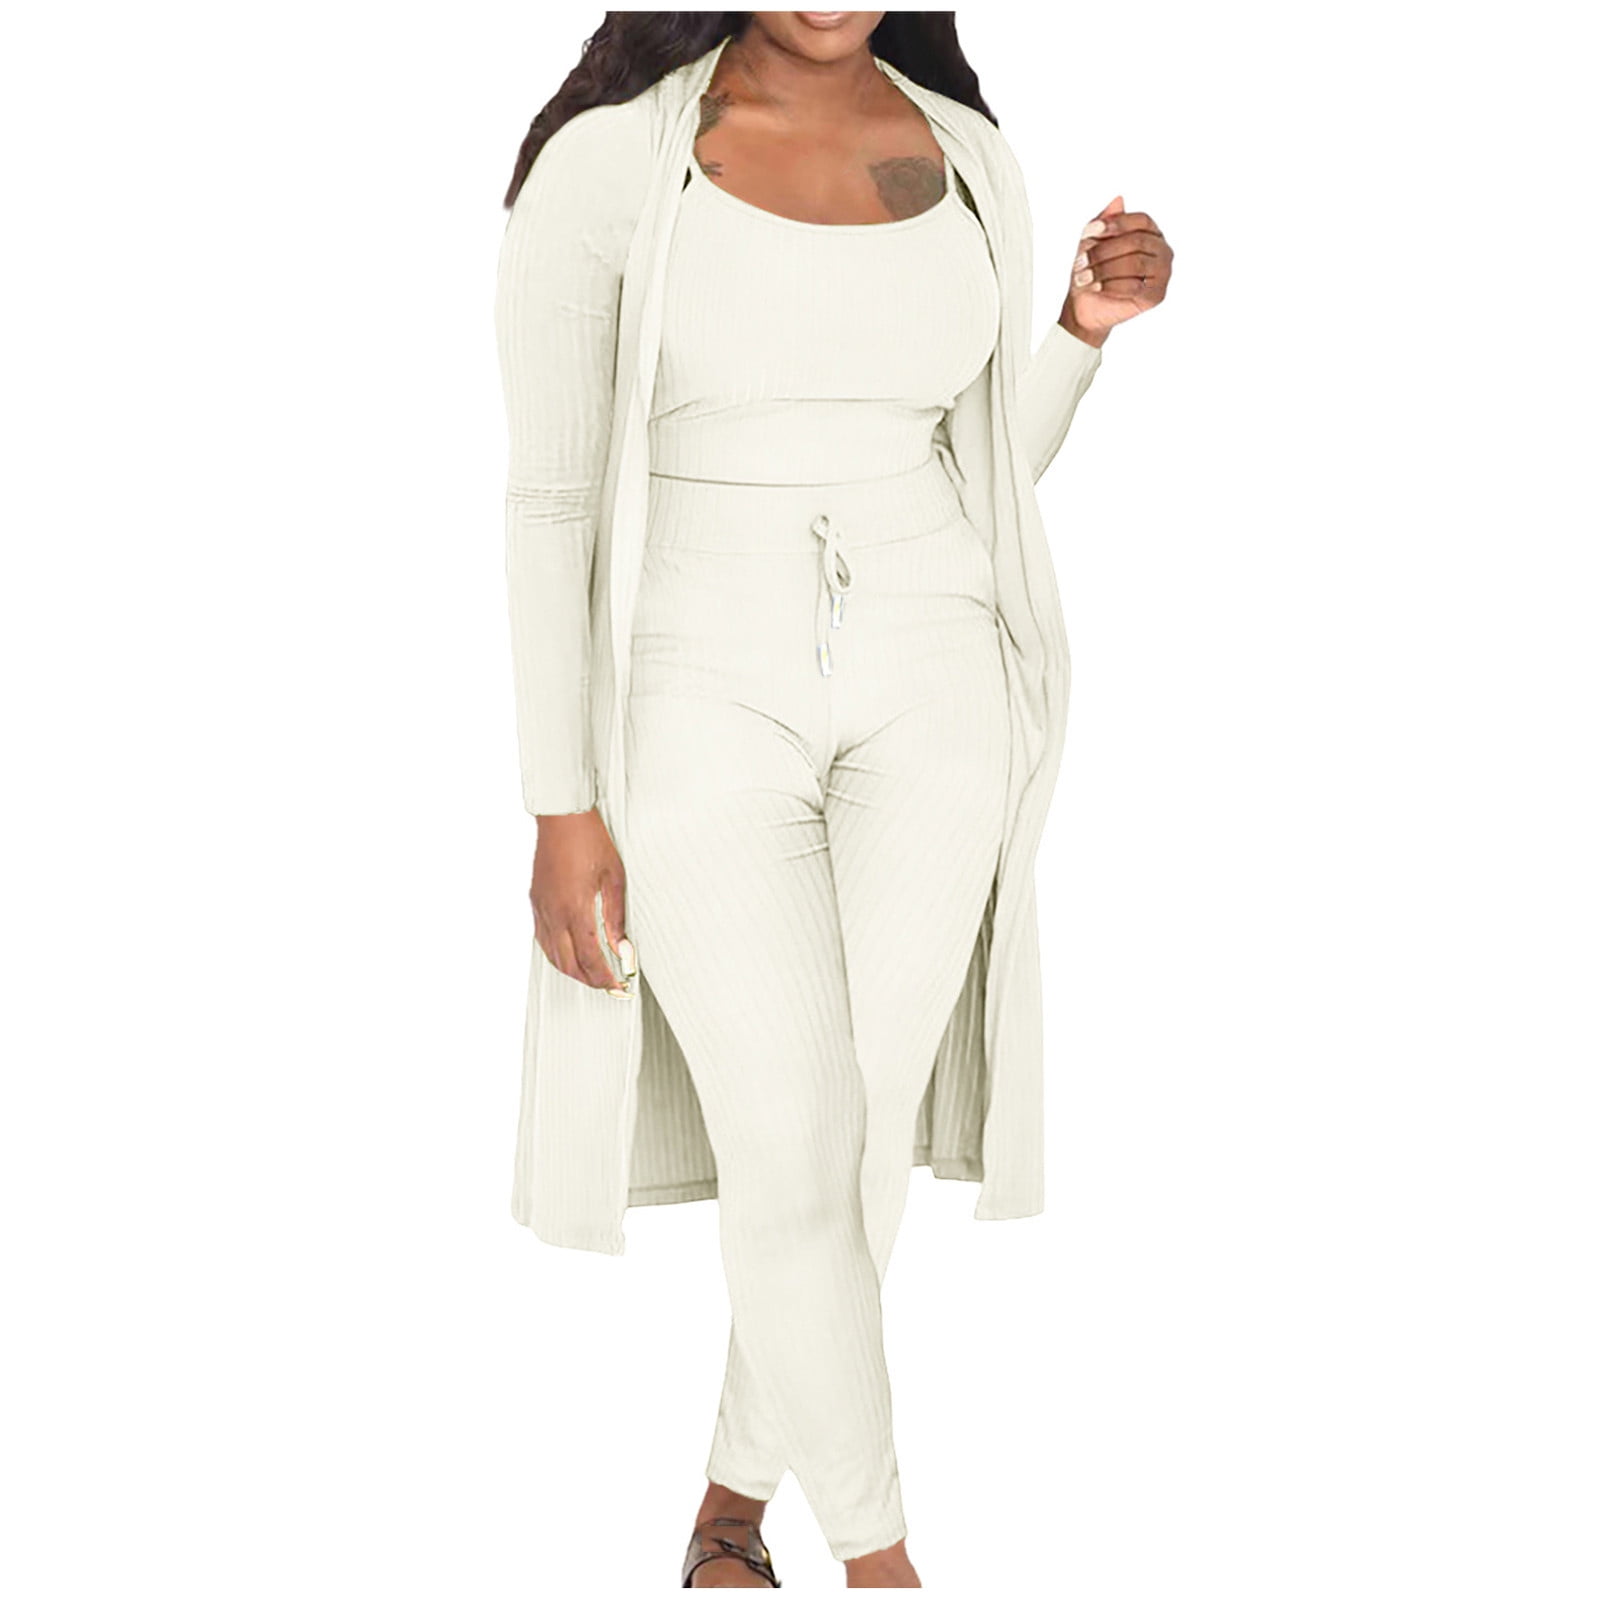  lcepcy  clearance items outlet 90 percent off Linen Set  for Women Crewneck Long Sleeve Cut out Tops and Elastic Waist Pants Loose  Comfy Lounge Outfits : Sports & Outdoors